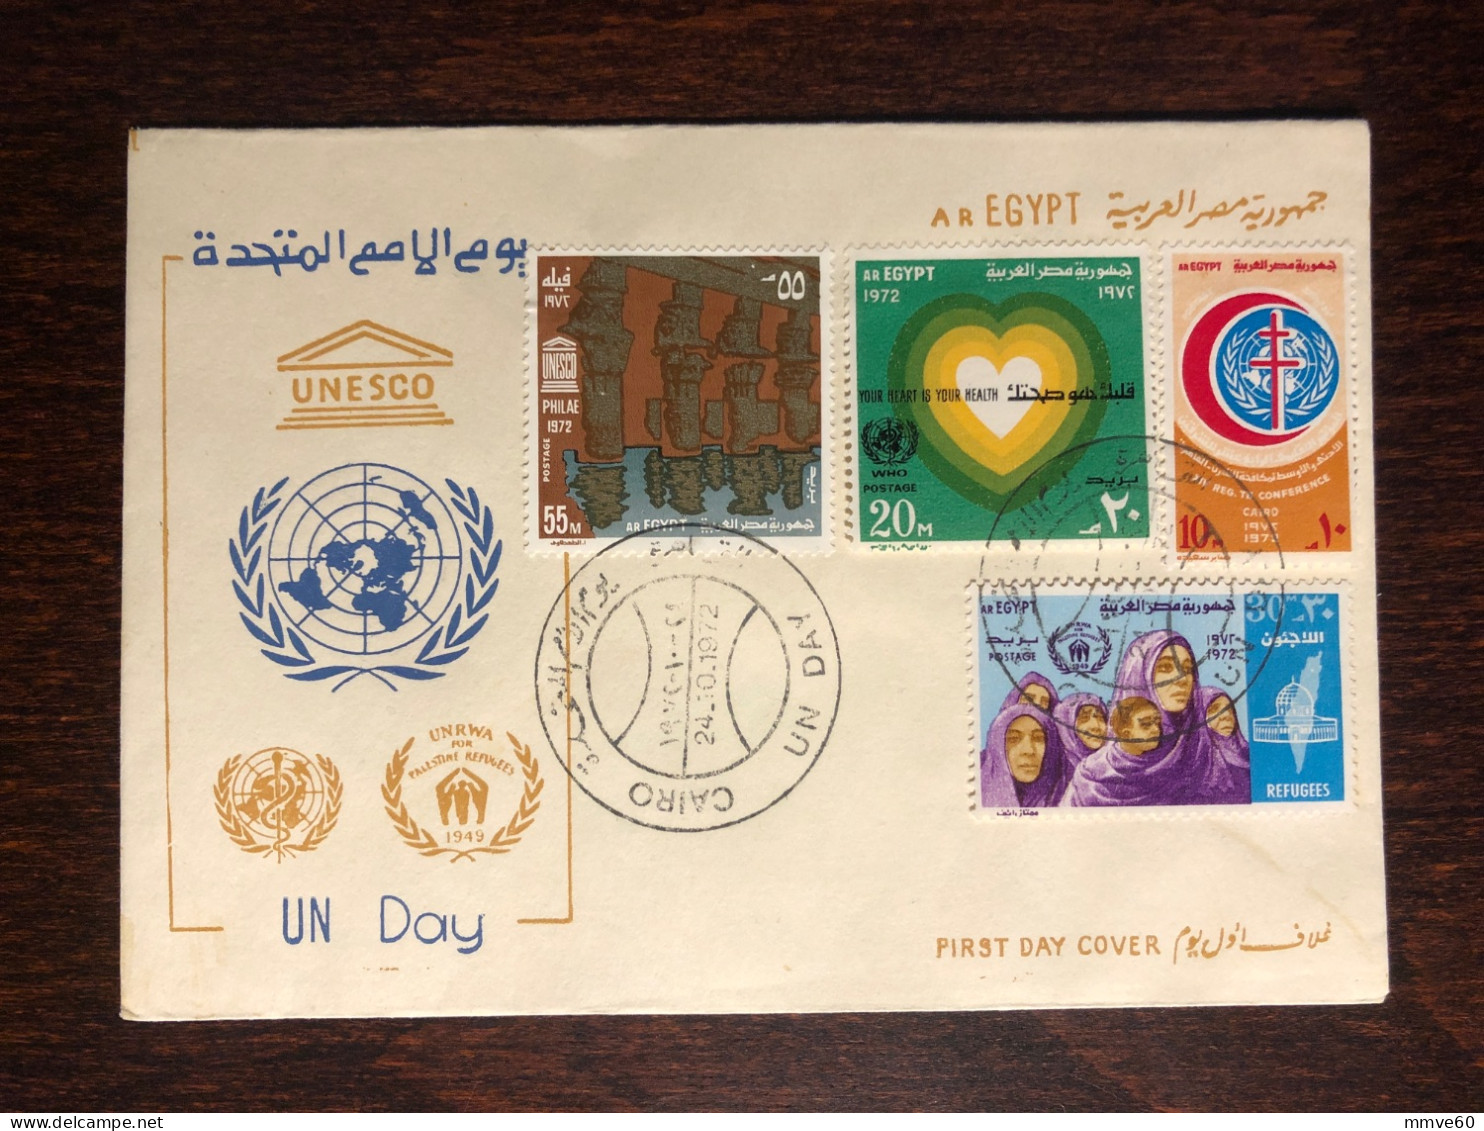 EGYPT FDC COVER 1972 YEAR TUBERCULOSIS TBC HEART CARDIOLOGY RED CRESCENT HEALTH MEDICINE - Briefe U. Dokumente